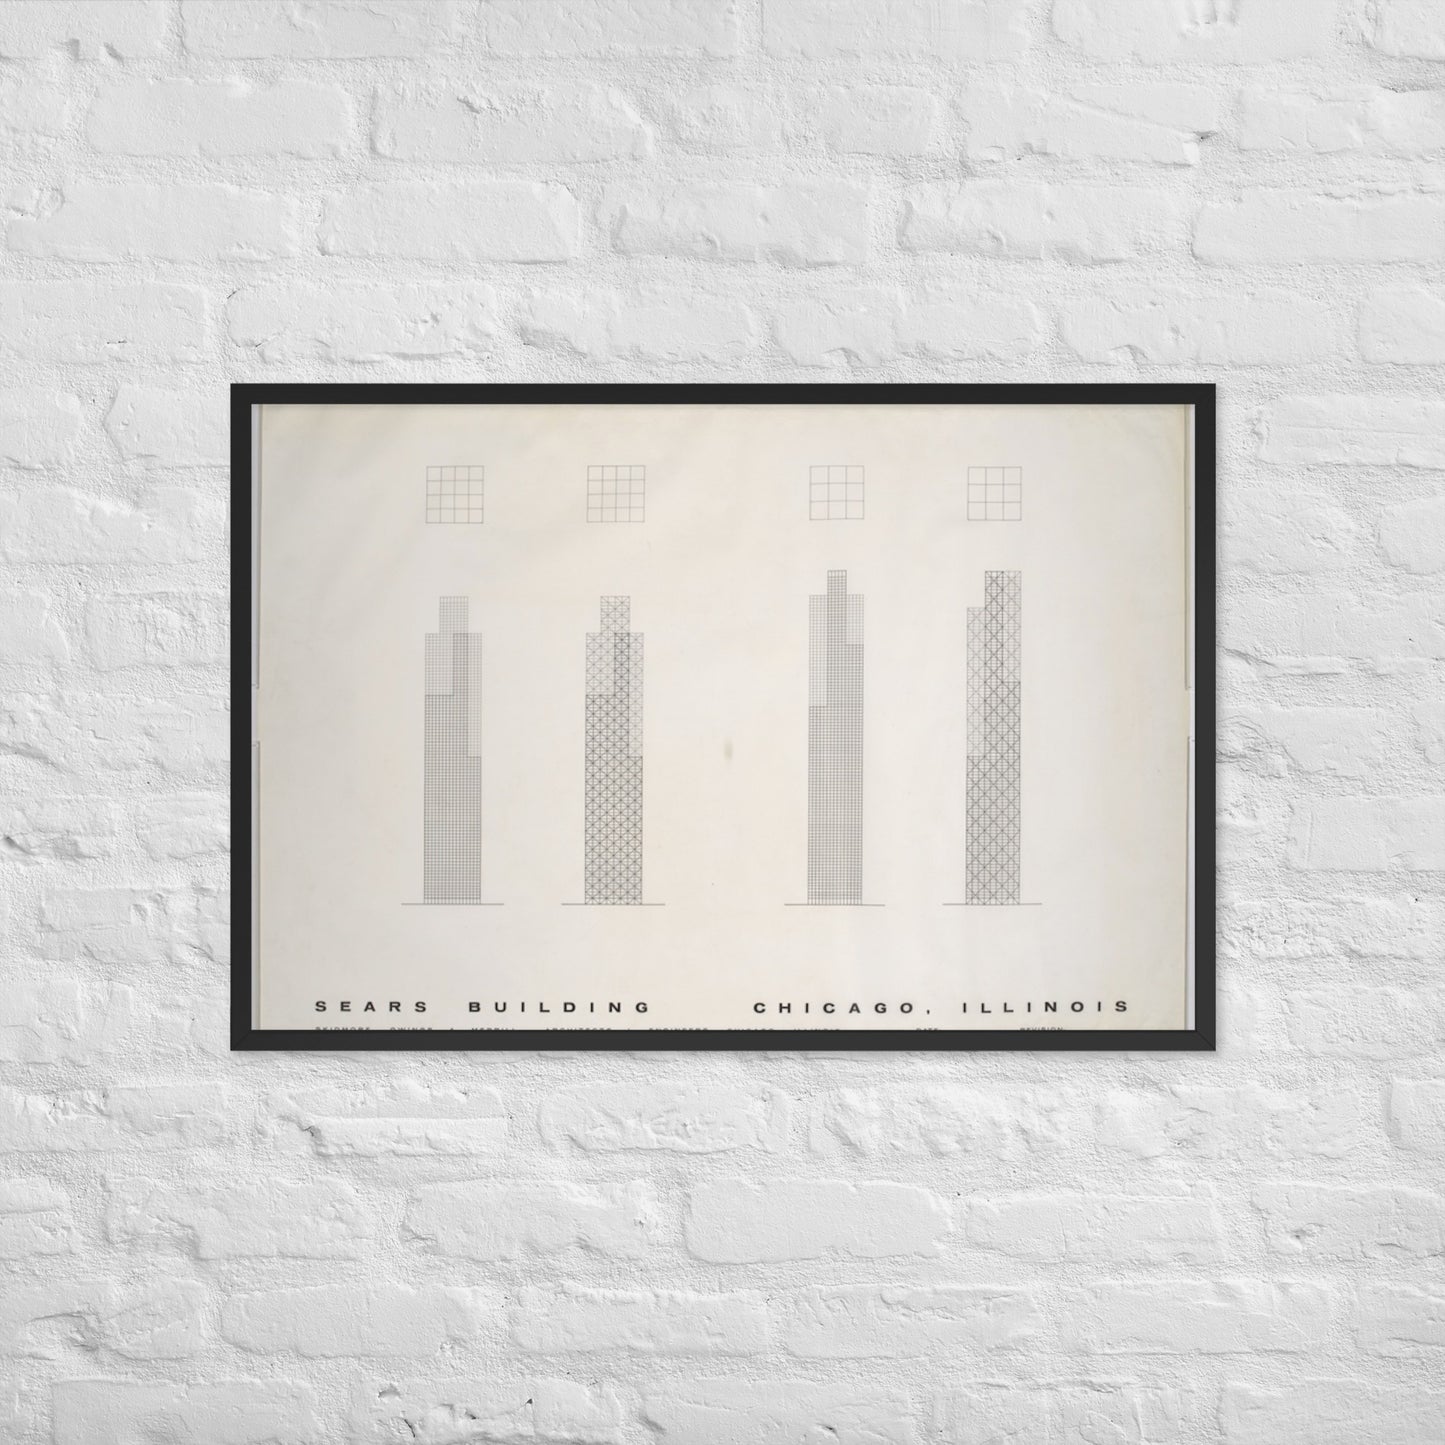 Sears Building Skidmore, Owings & Merrill (Architect) Drawing - Framed poster